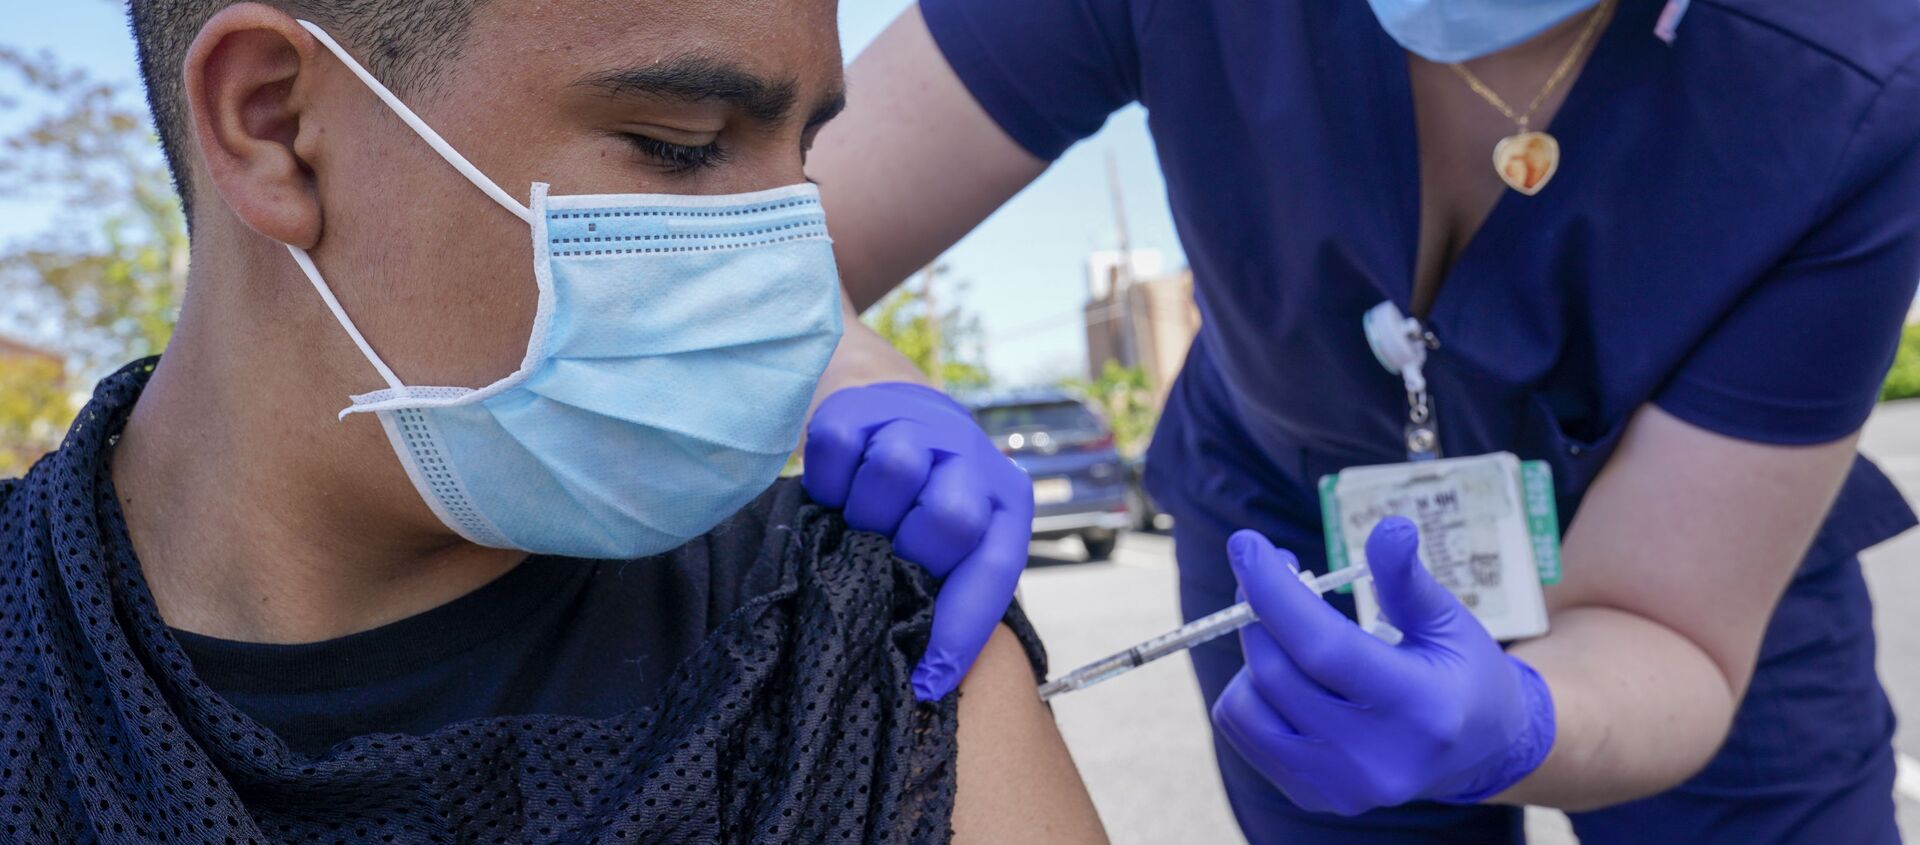 Justin Bishop, 13, watches as Registered Nurse Jennifer Reyes inoculates him with the first dose of the Pfizer COVID-19 vaccine at the Mount Sinai South Nassau Vaxmobile parked at the De La Salle School, Friday, May 14, 2021, in Freeport, N.Y.  - Sputnik International, 1920, 16.05.2021